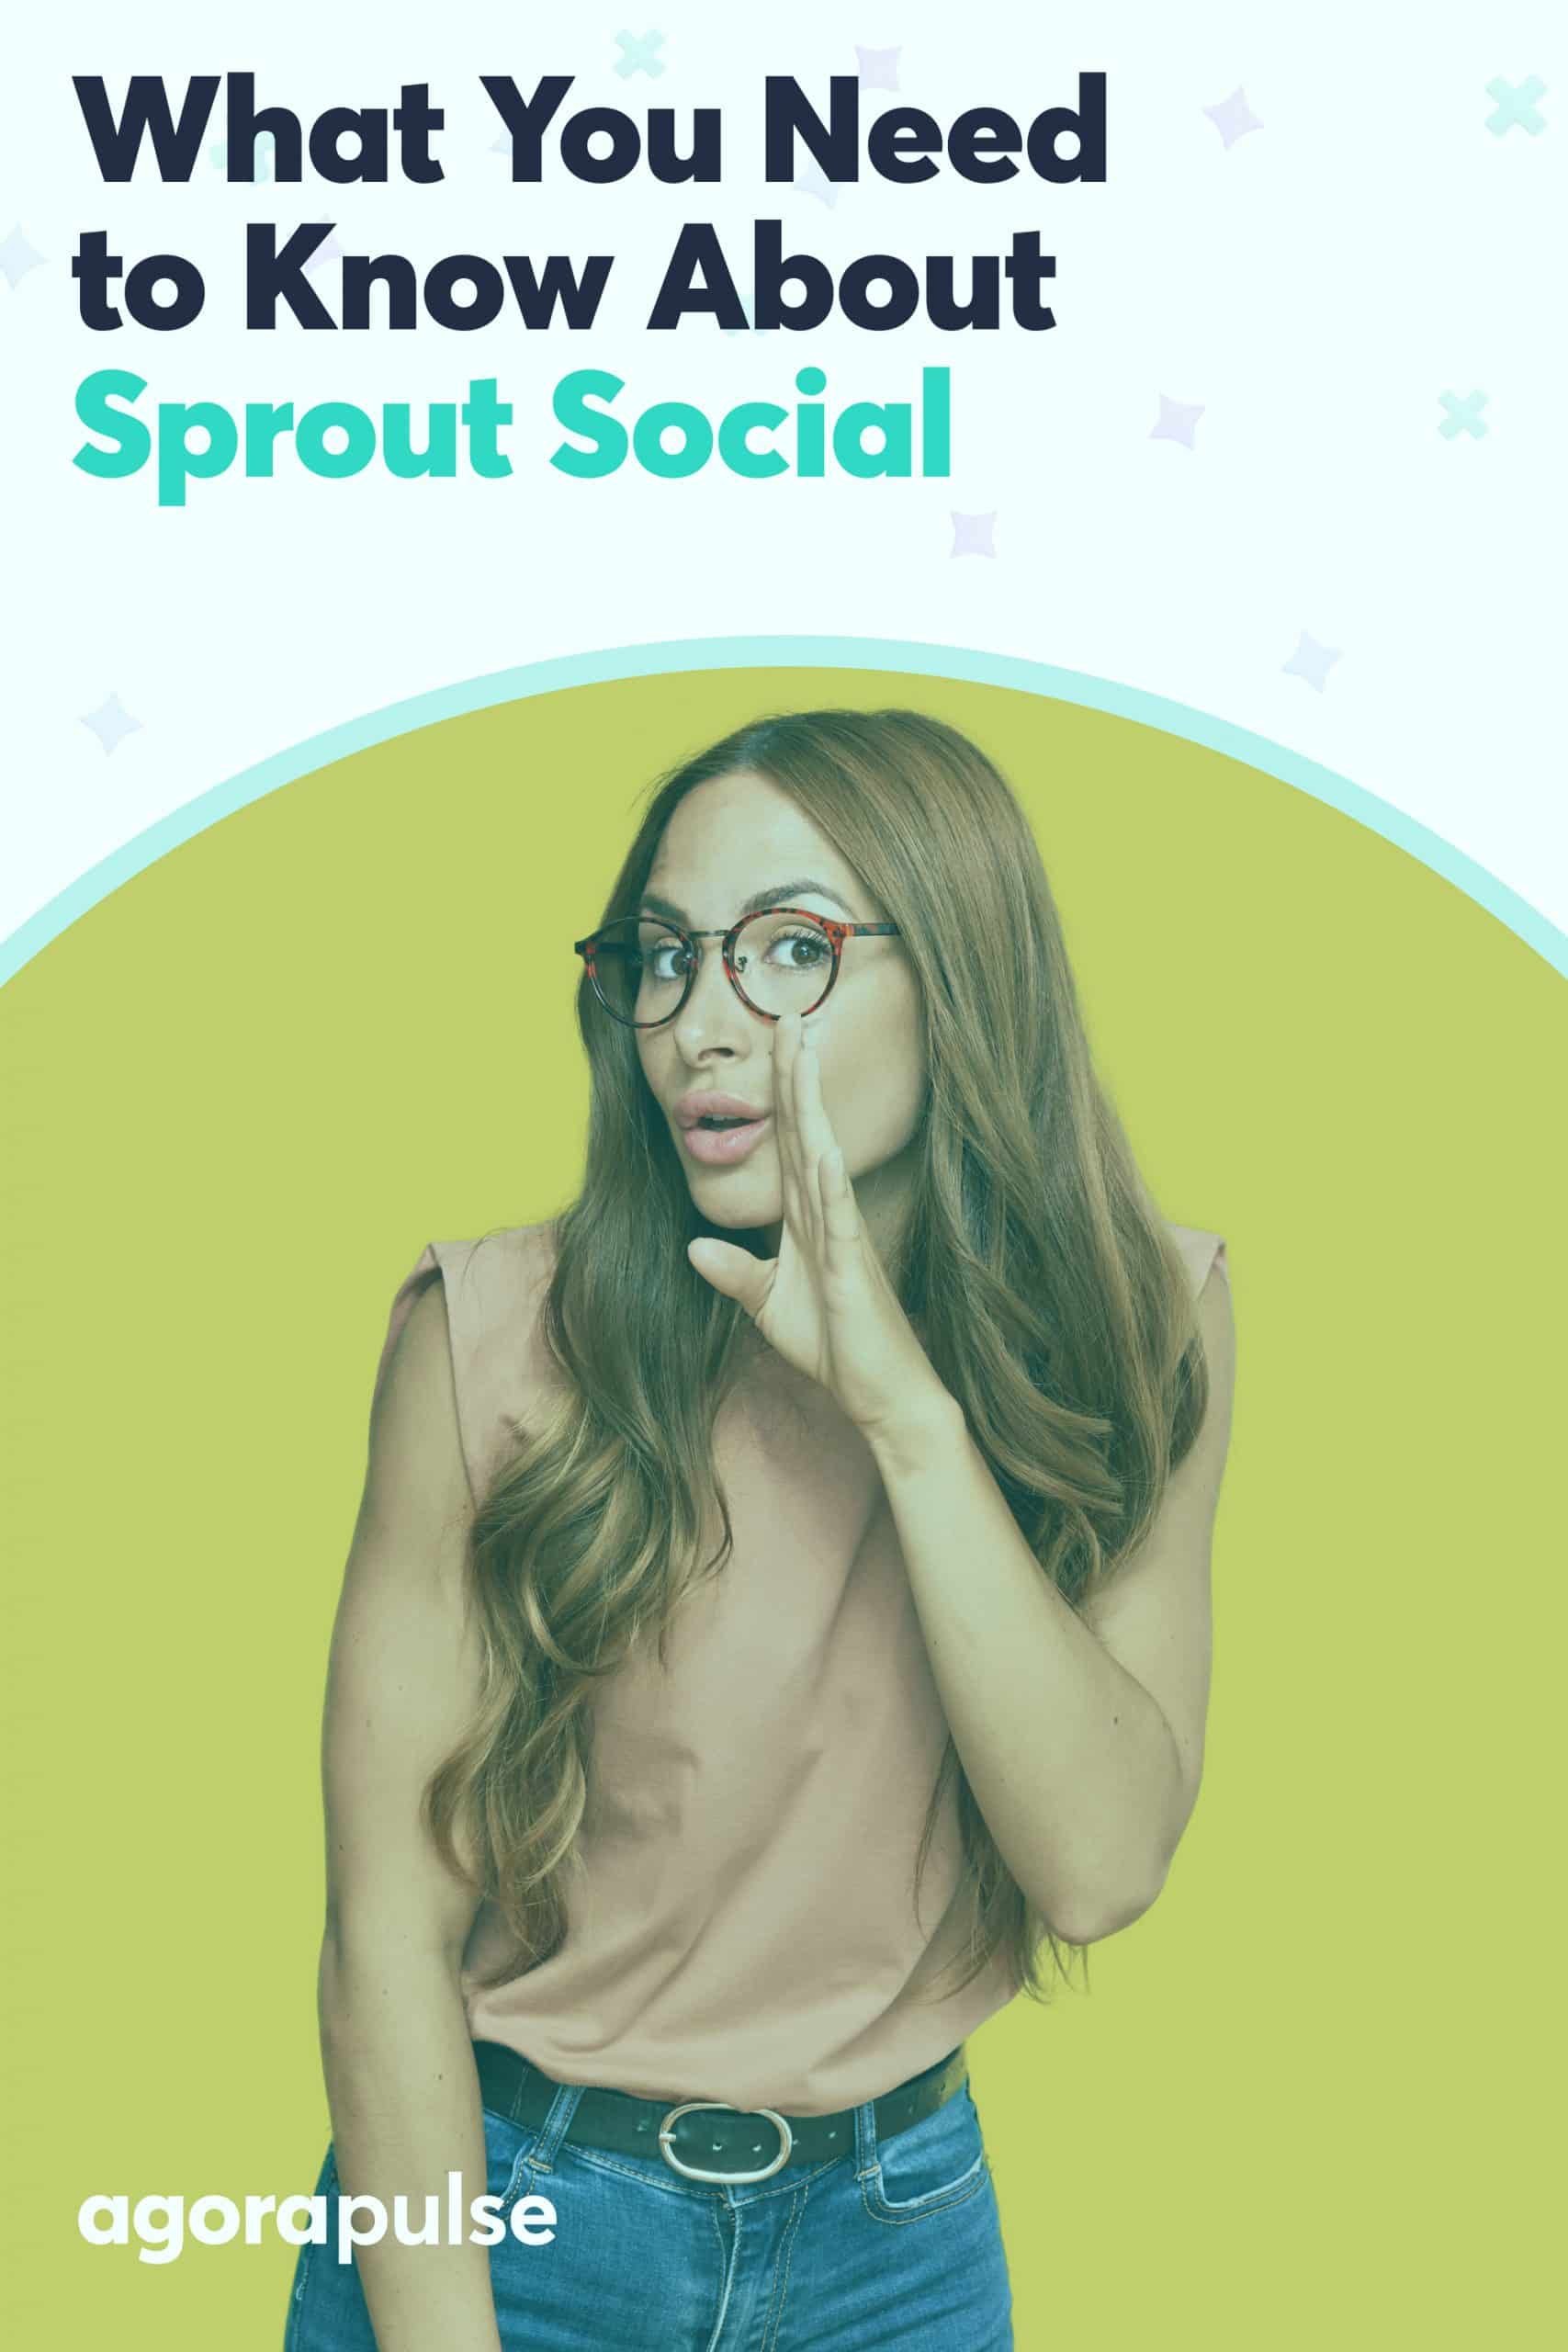 Three Things You Really Should Know About Sprout Social